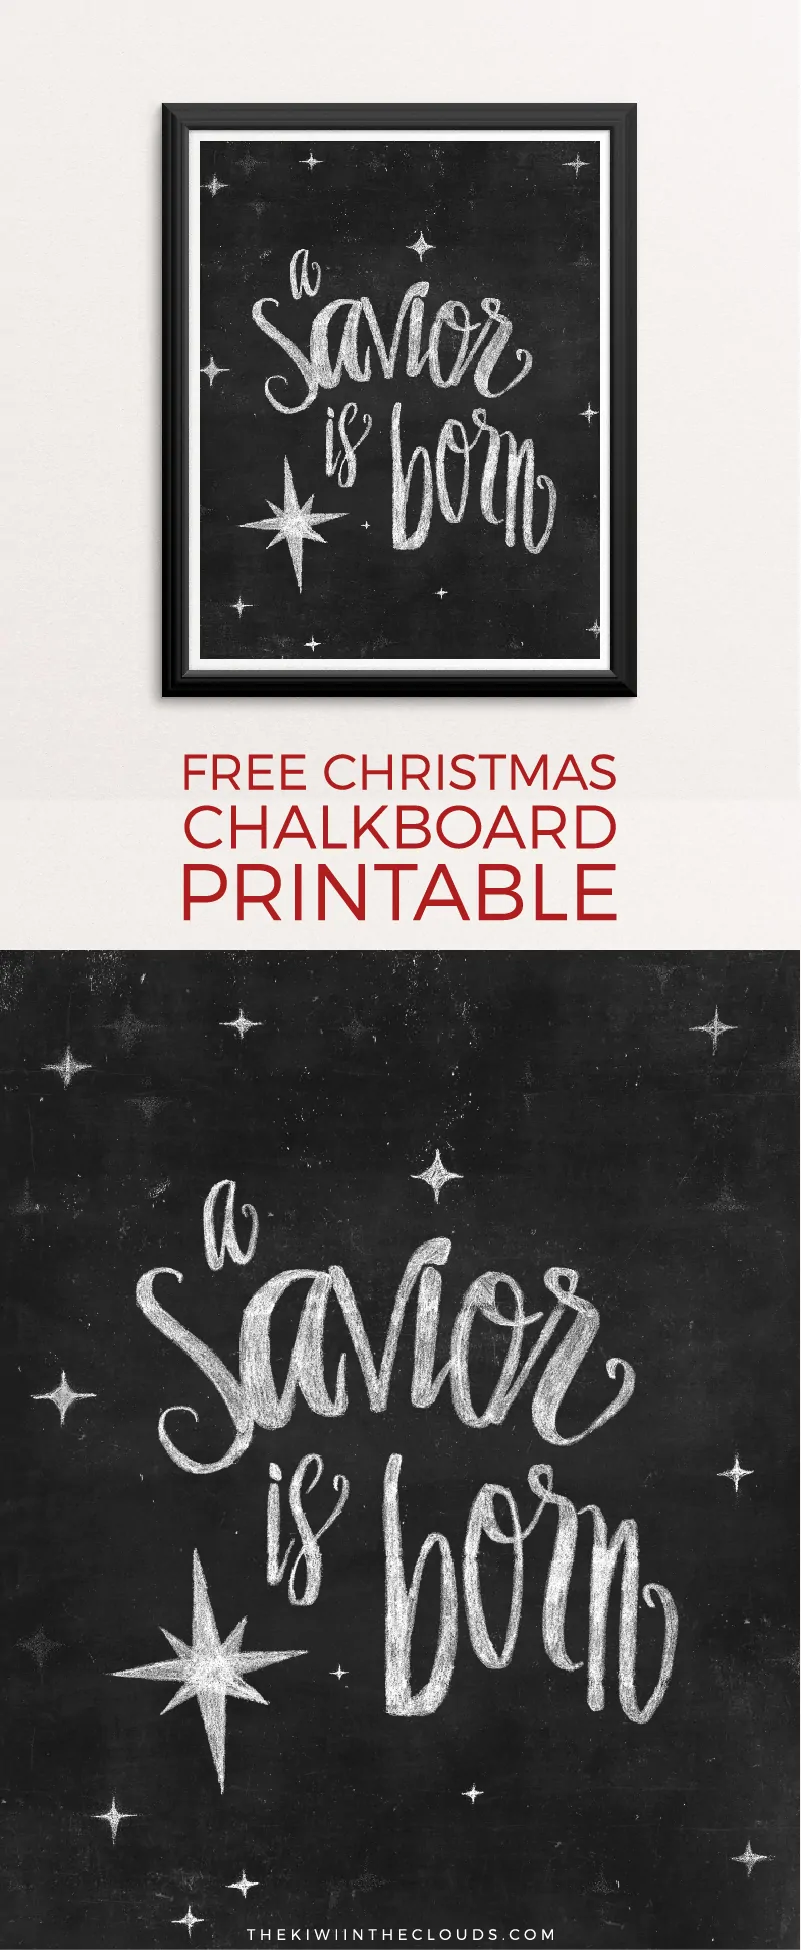 A Savior is Born Christmas Free Printable | Remember the reason for the season with this chalkboard art free printable. Click through to download yours today!